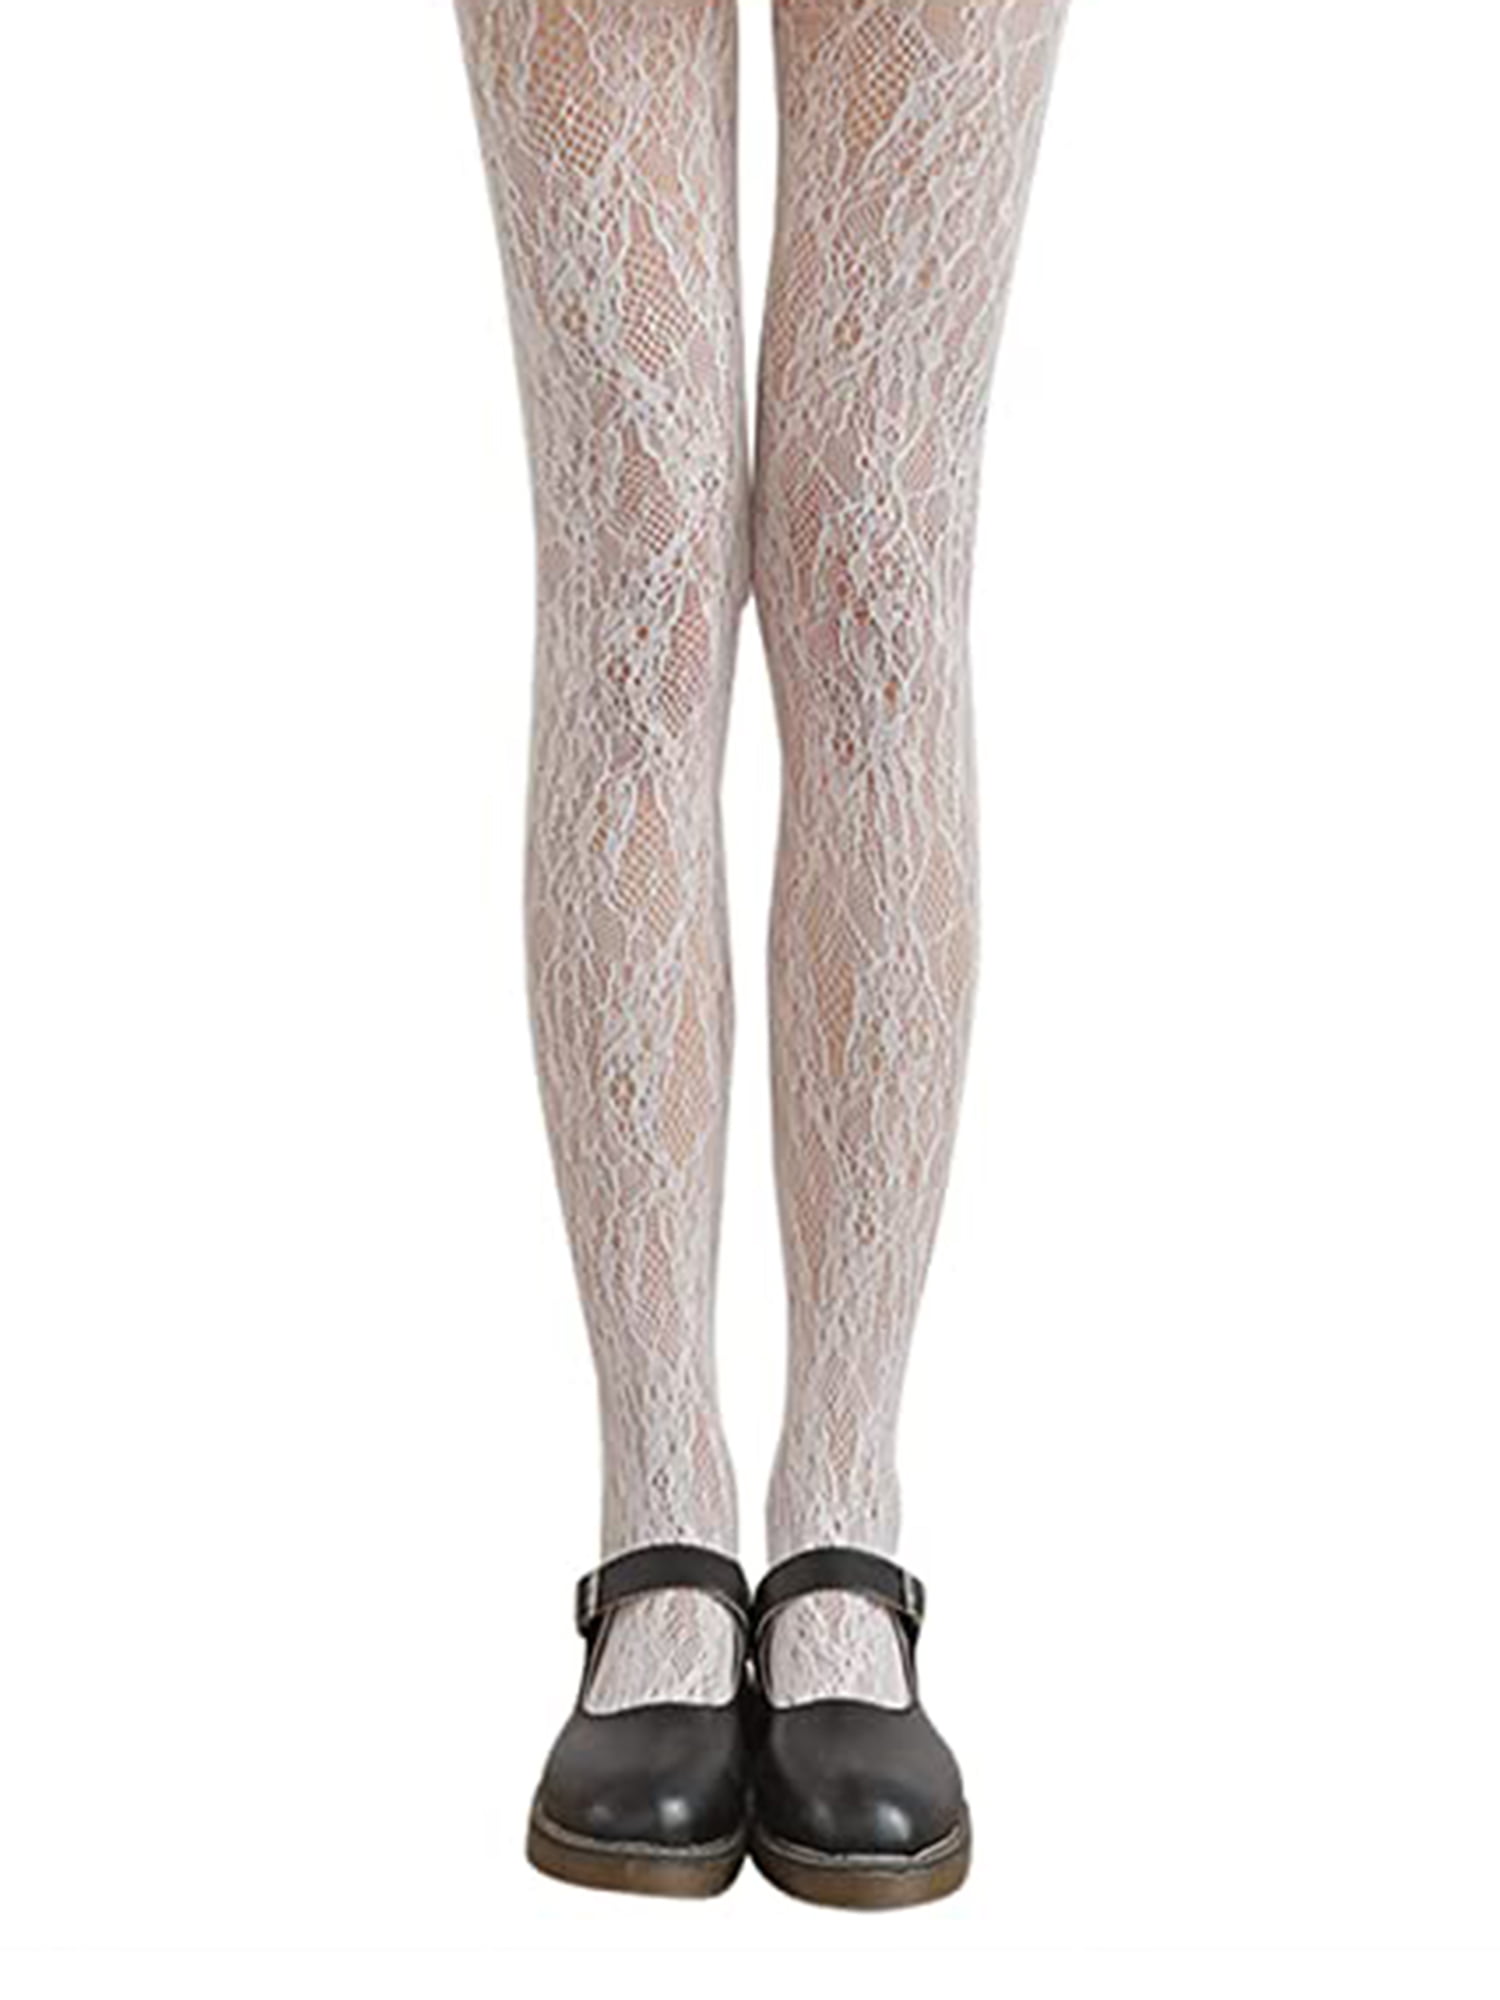 Mylleure Women Sheer Pantyhose Tights Indie Aesthetic Lace Grunge Goth  Fishnet Tights Sexy High Waist Stretchy Slim Leggings at  Women's  Clothing store